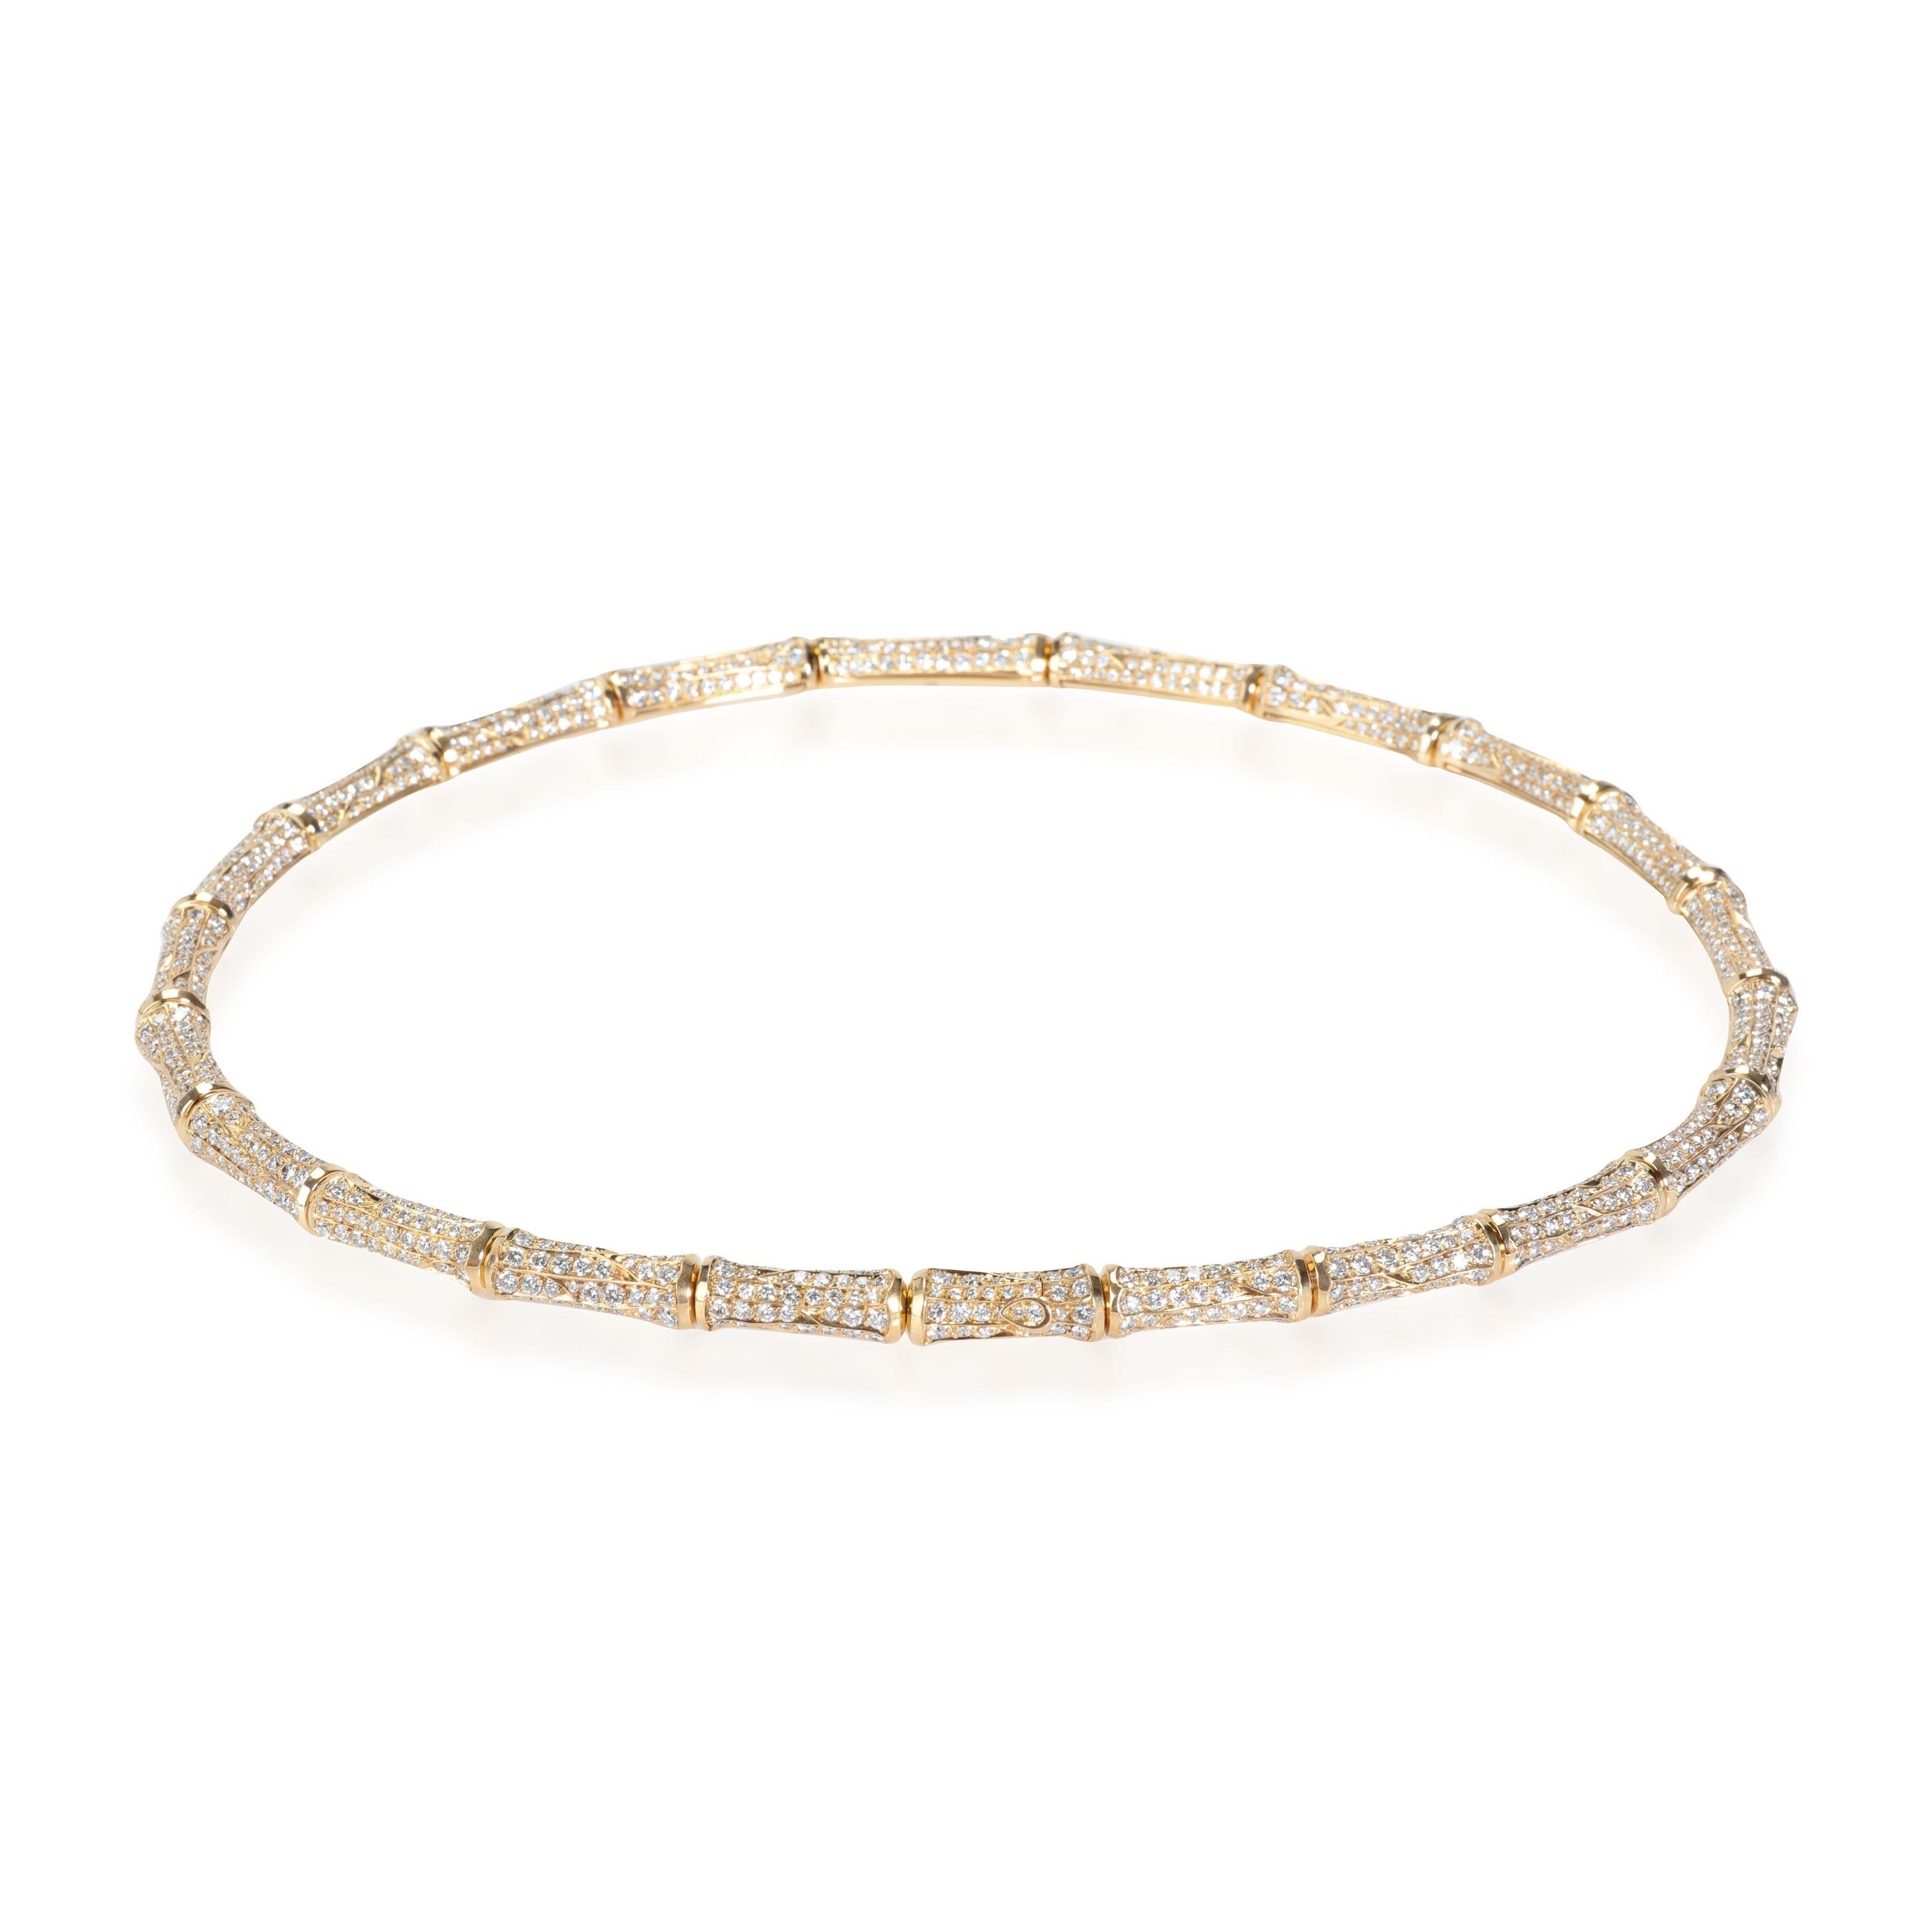 Cartier Bamboo Diamond Necklace in 18K Yellow Gold 22.00 CTW

PRIMARY DETAILS
SKU: 112125
Listing Title: Cartier Bamboo Diamond Necklace in 18K Yellow Gold 22.00 CTW
Condition Description: Retails for 125,000 USD. In excellent condition and recently